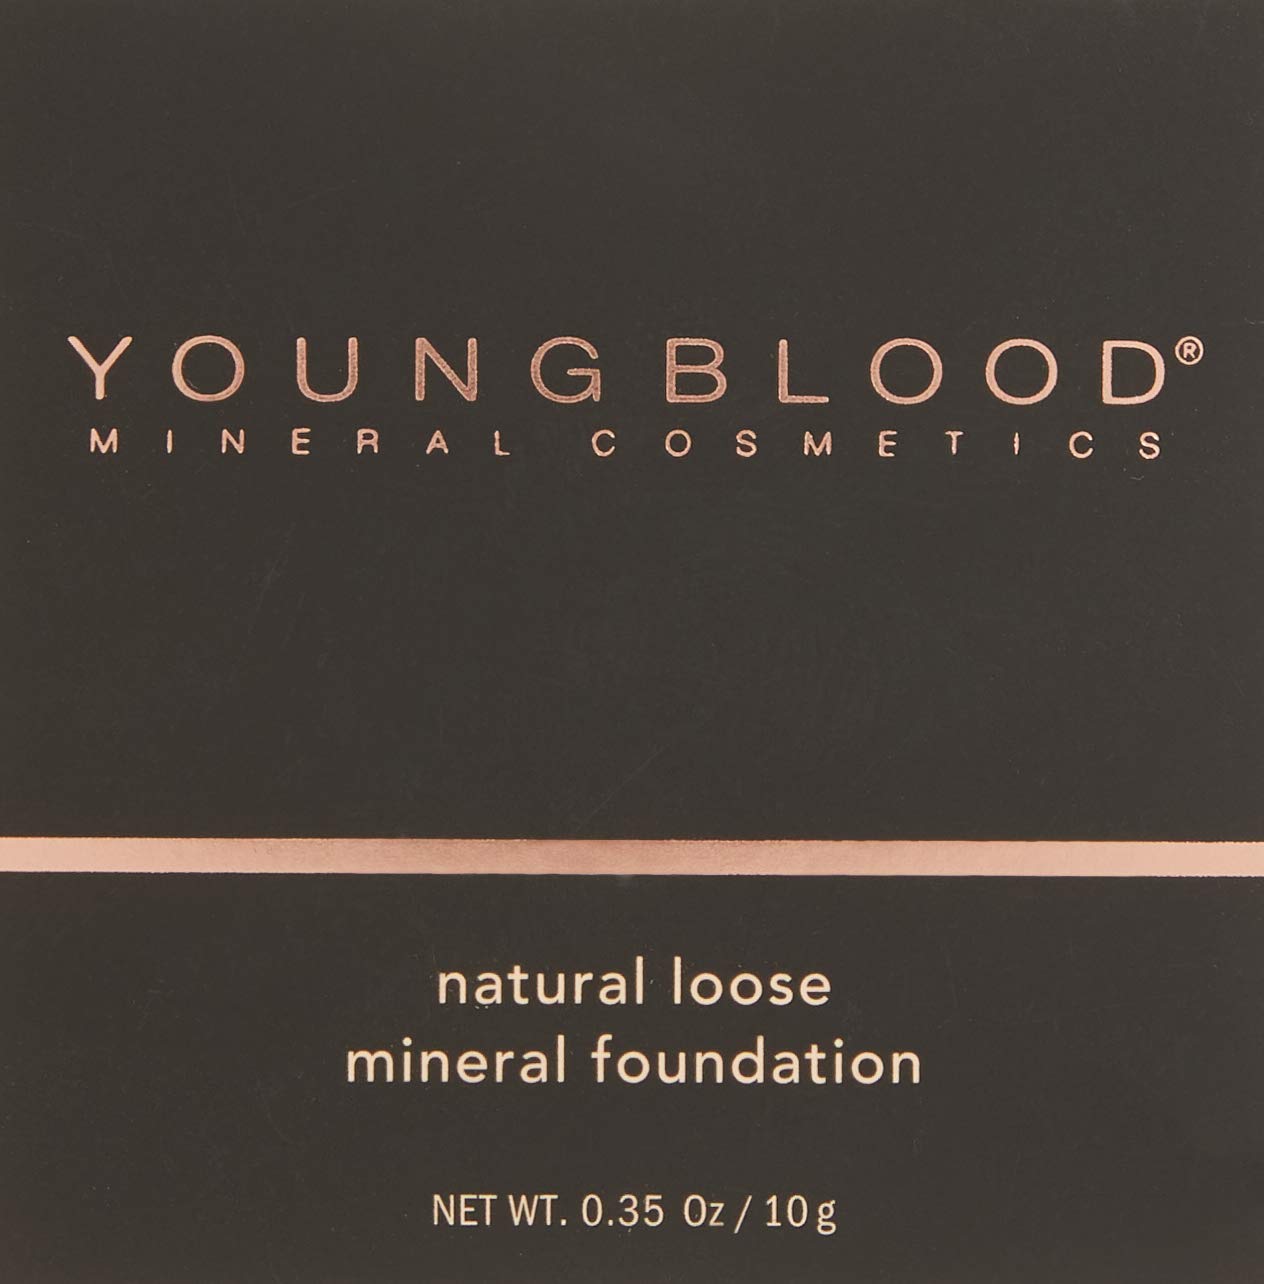 Youngblood Clean Luxury Cosmetics Natural Loose Mineral Foundation, Neutral | Loose Face Powder Foundation Mineral Illuminating Full Coverage Oil Control Matte Lasting | Vegan, Cruelty Free